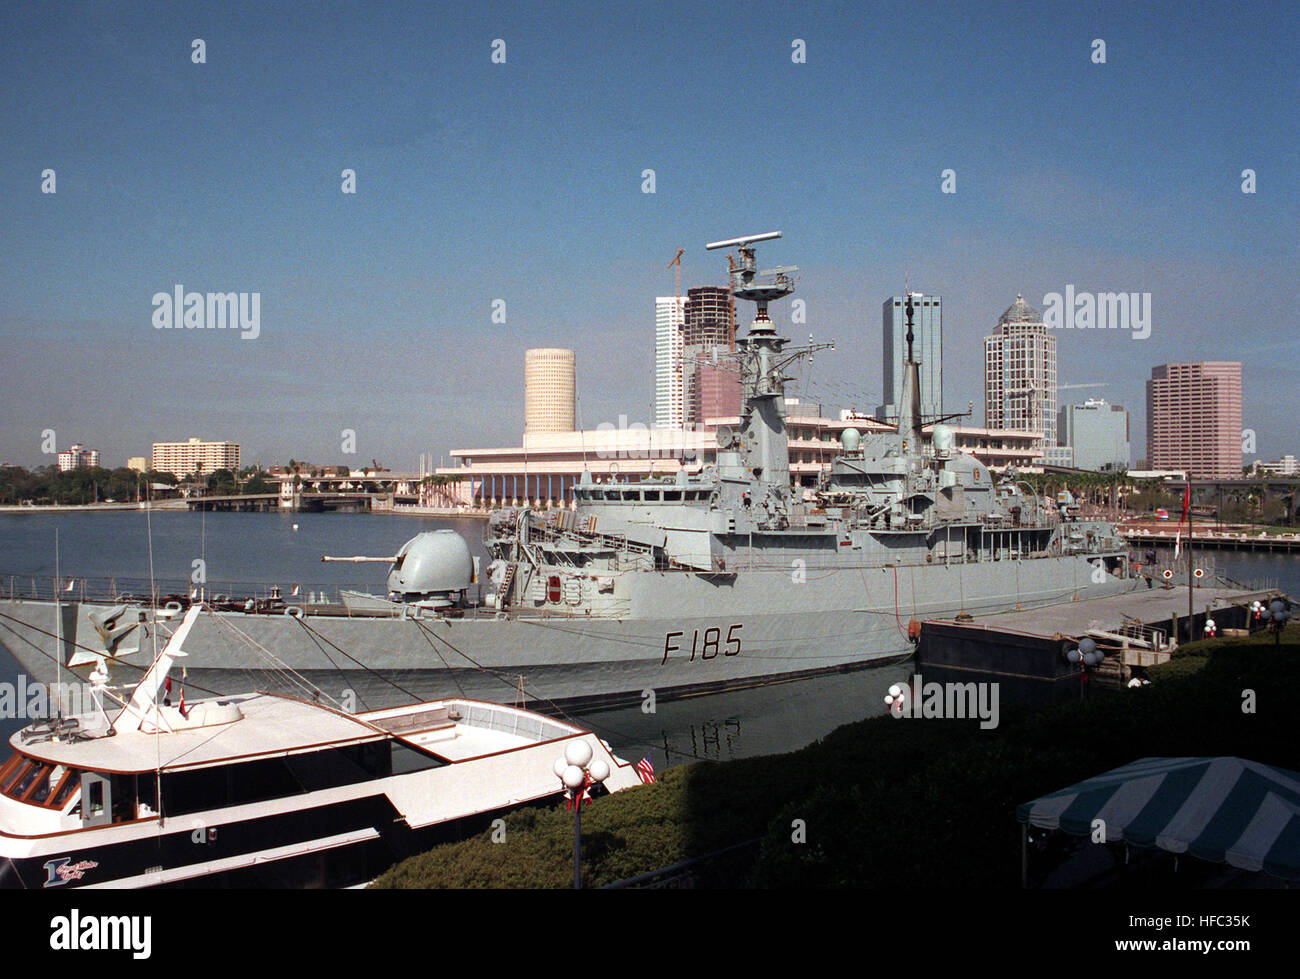 The British frigate HMS Avenger (F-185) lies tied up near a civilian vessel during it visit to the city. HMS Avenger (F185) at Tampa Bay 1992 Stock Photo